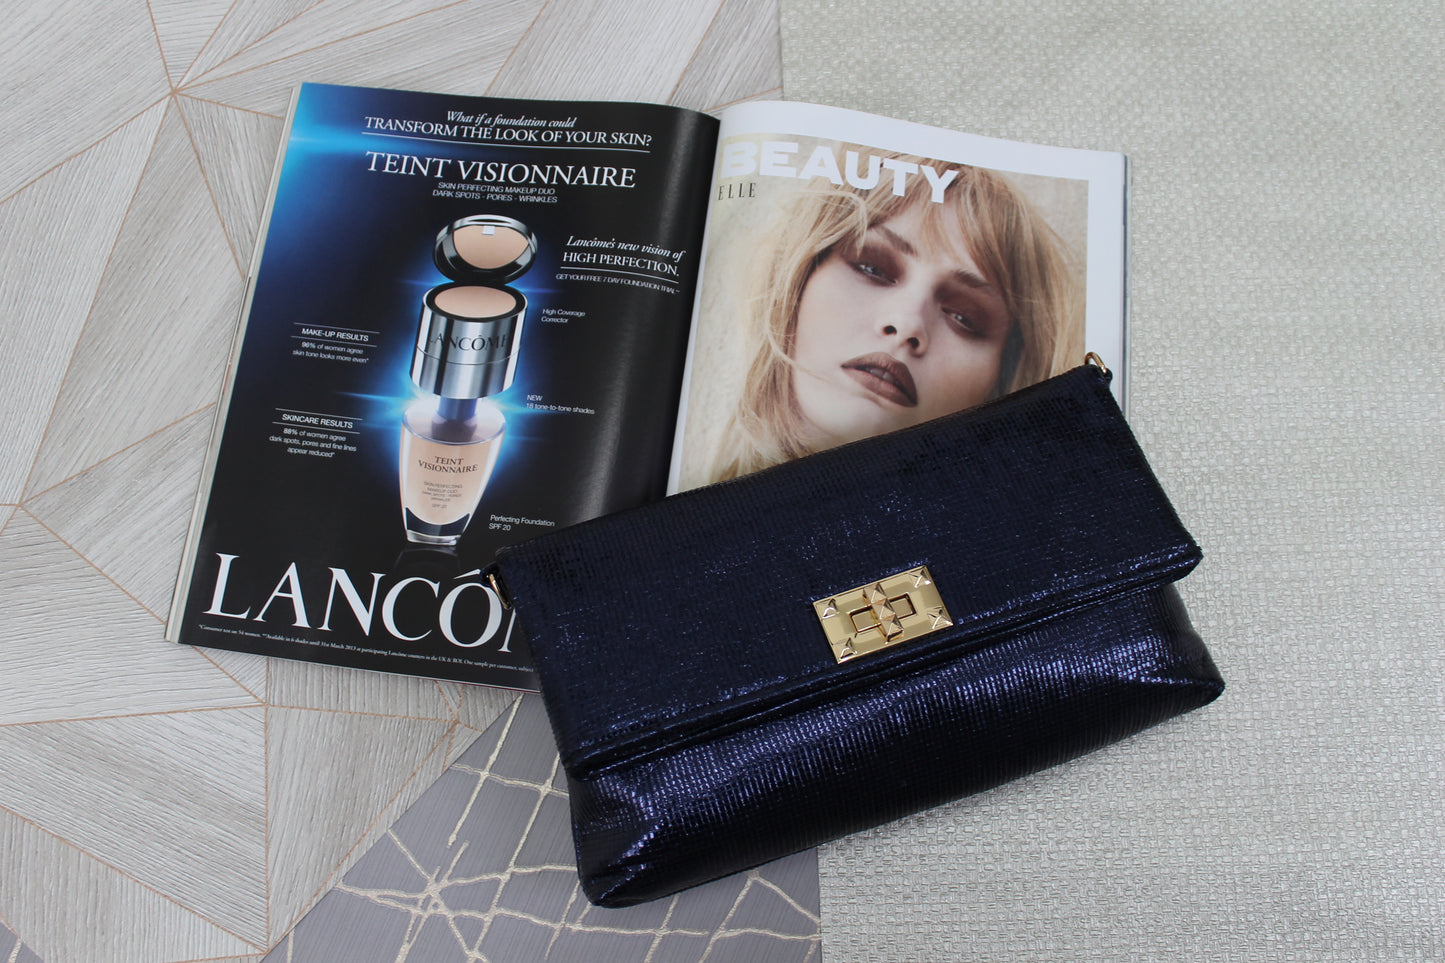 Tess Glamour Party Clutch Bag Navy Blue